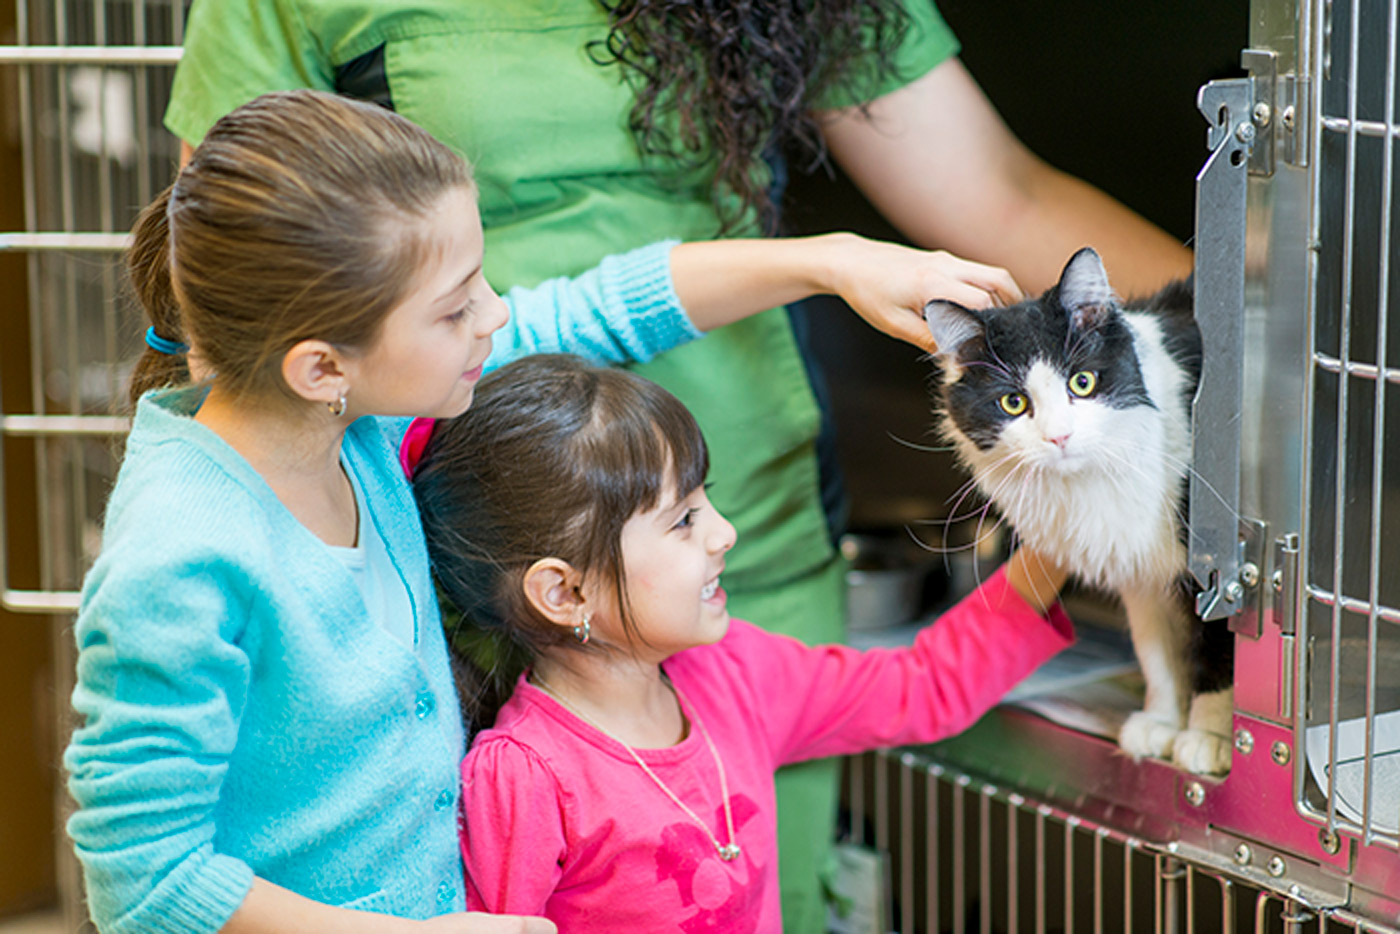 Kids can earn money while learning about a cause. These two children are petting a cat at a kennel.